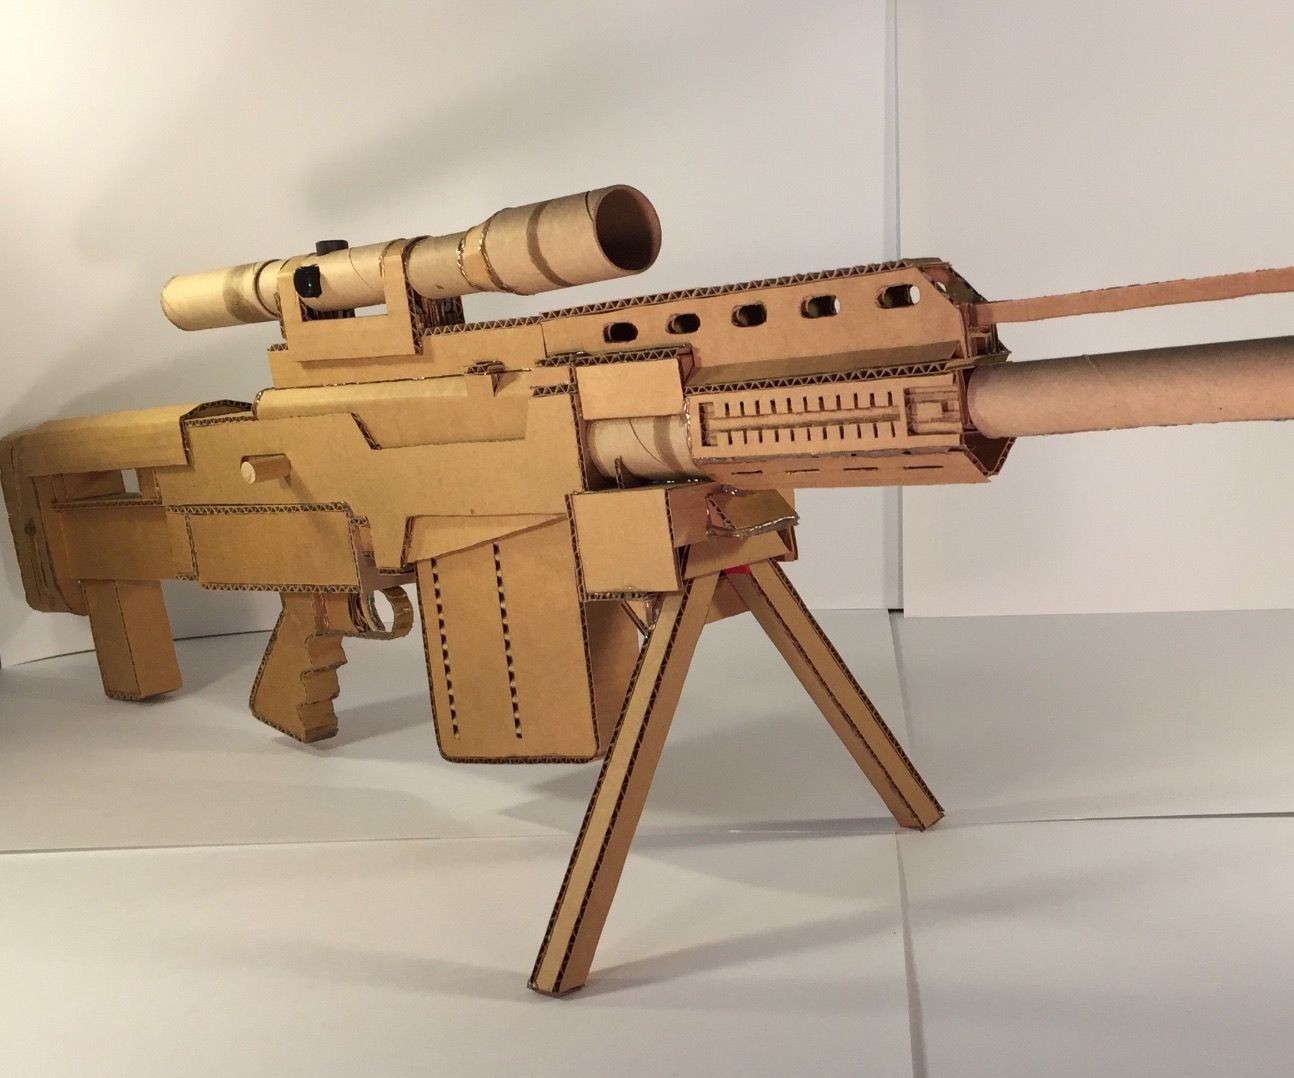 Weapon Papercraft Fully Functioning Cardboard as 50 Sniper Rifle